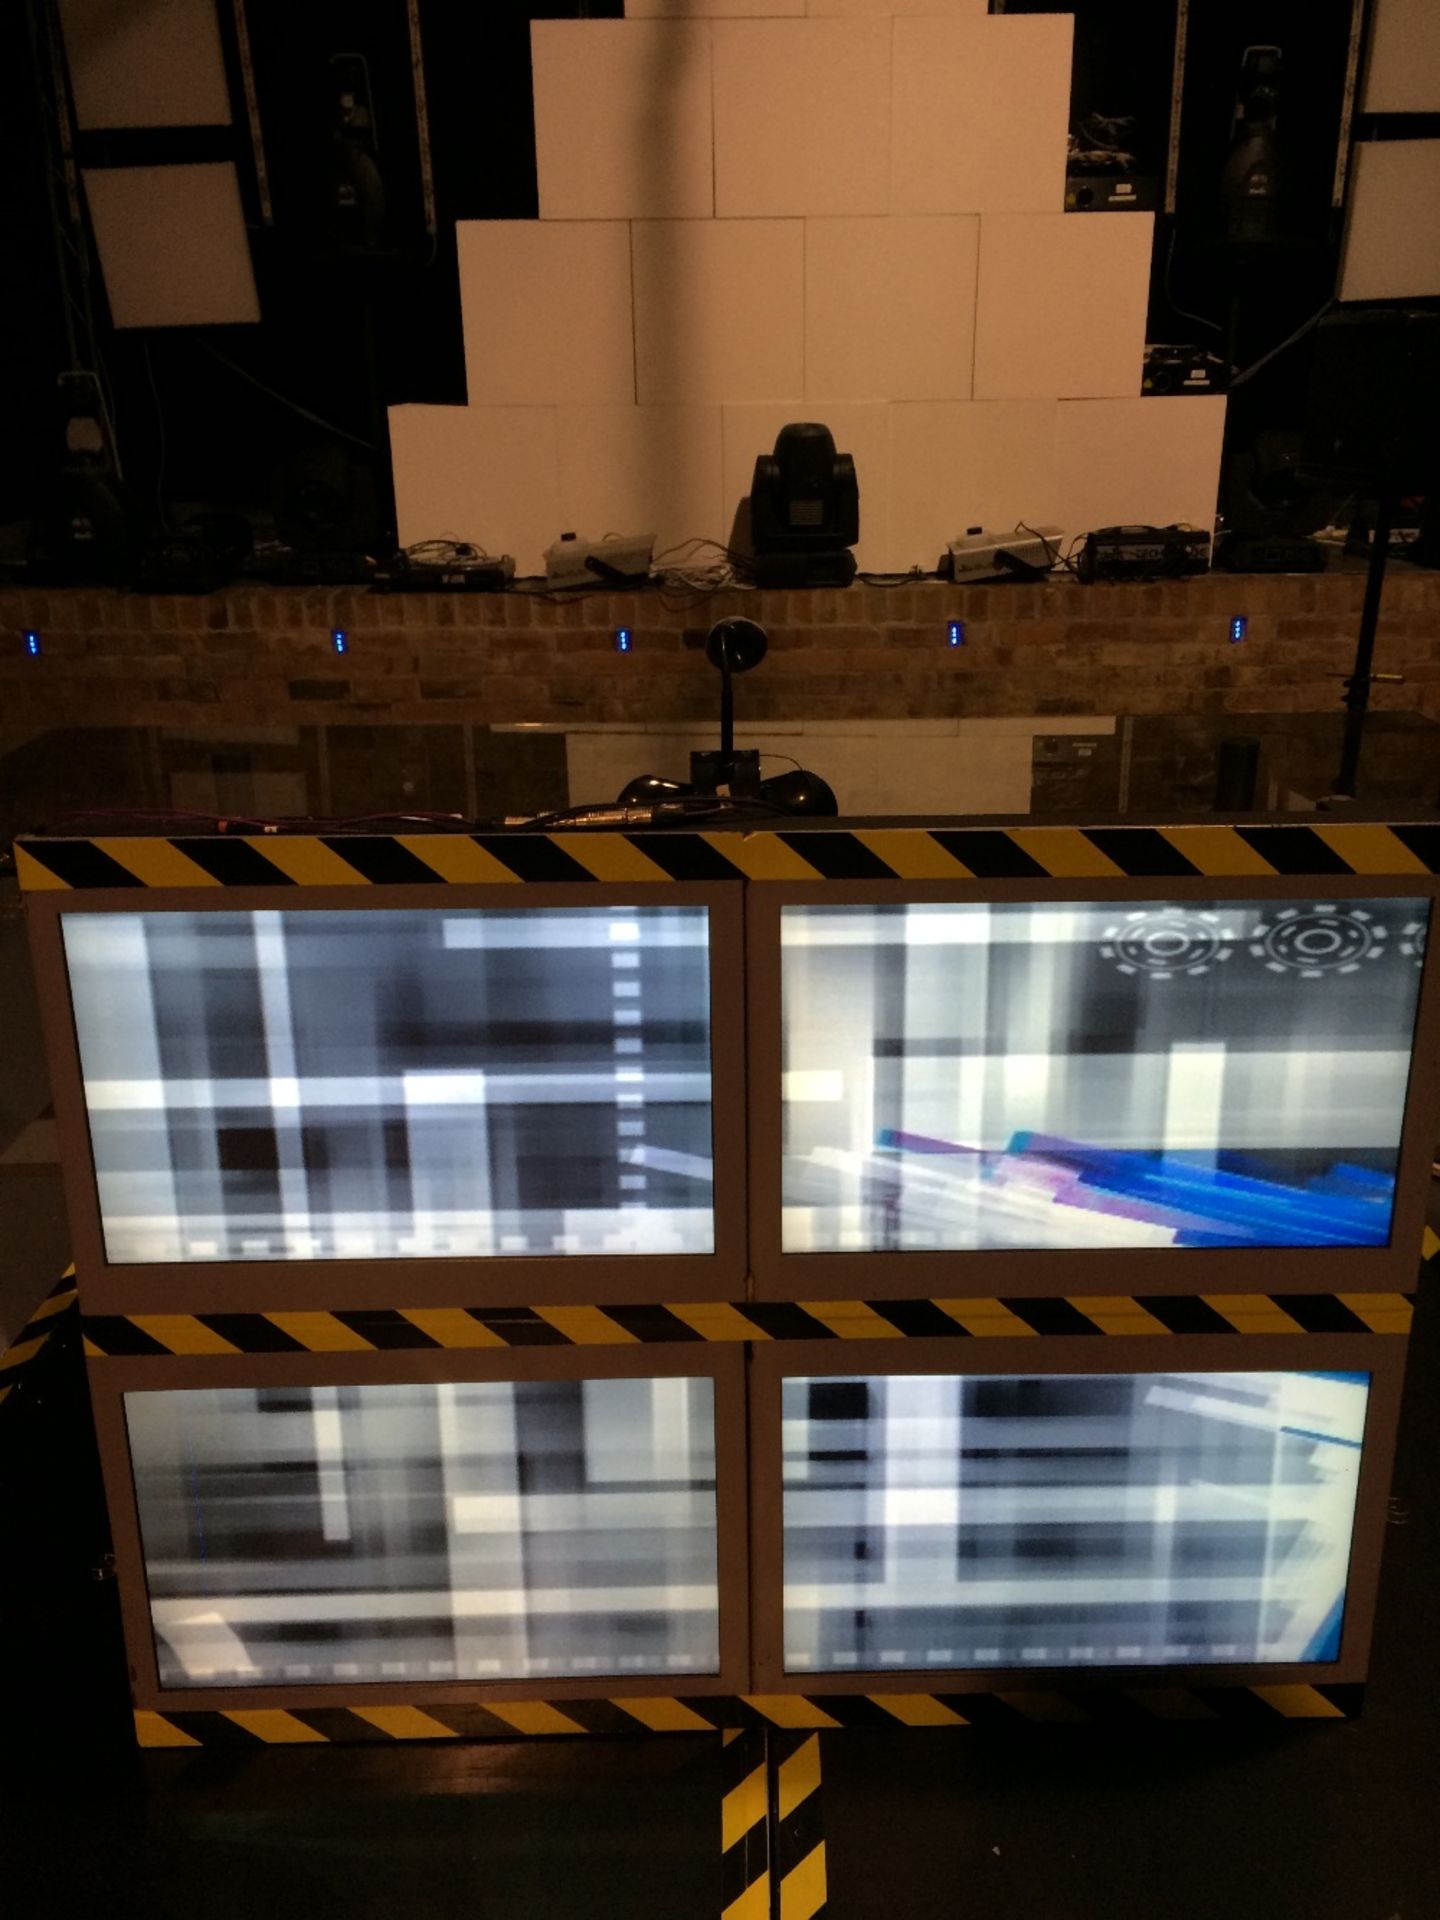 Custom Design Dj Consoe With 4 Screen Lcd Video Wall Metal Front Enclosure And Stand Glass Shelf For - Image 3 of 11